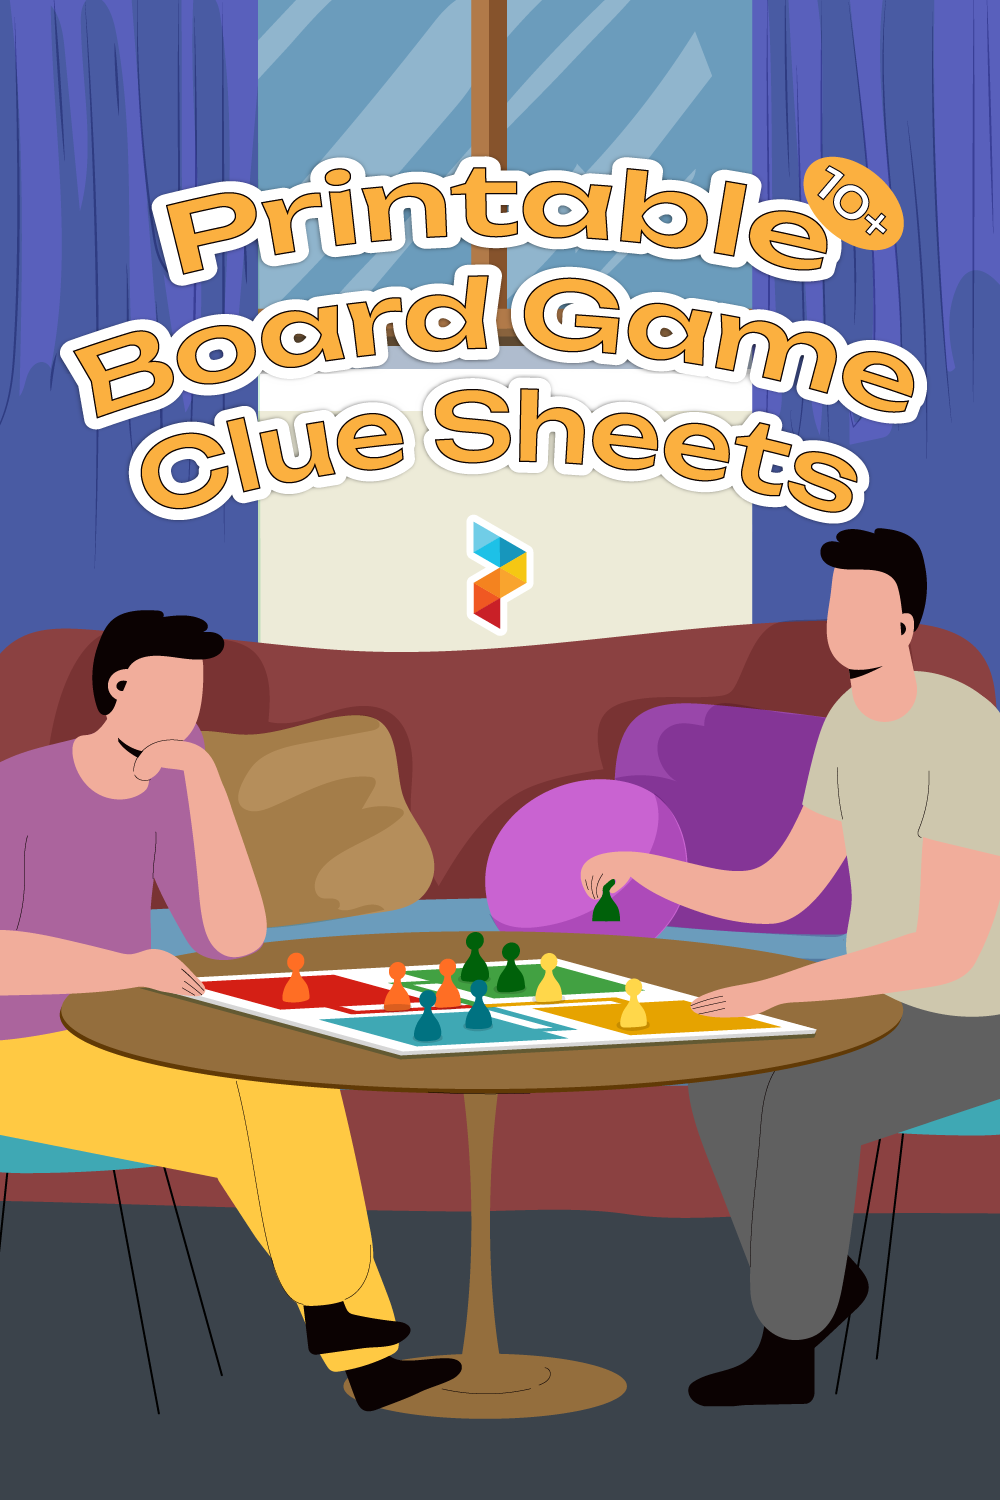 Board Game Clue Sheets